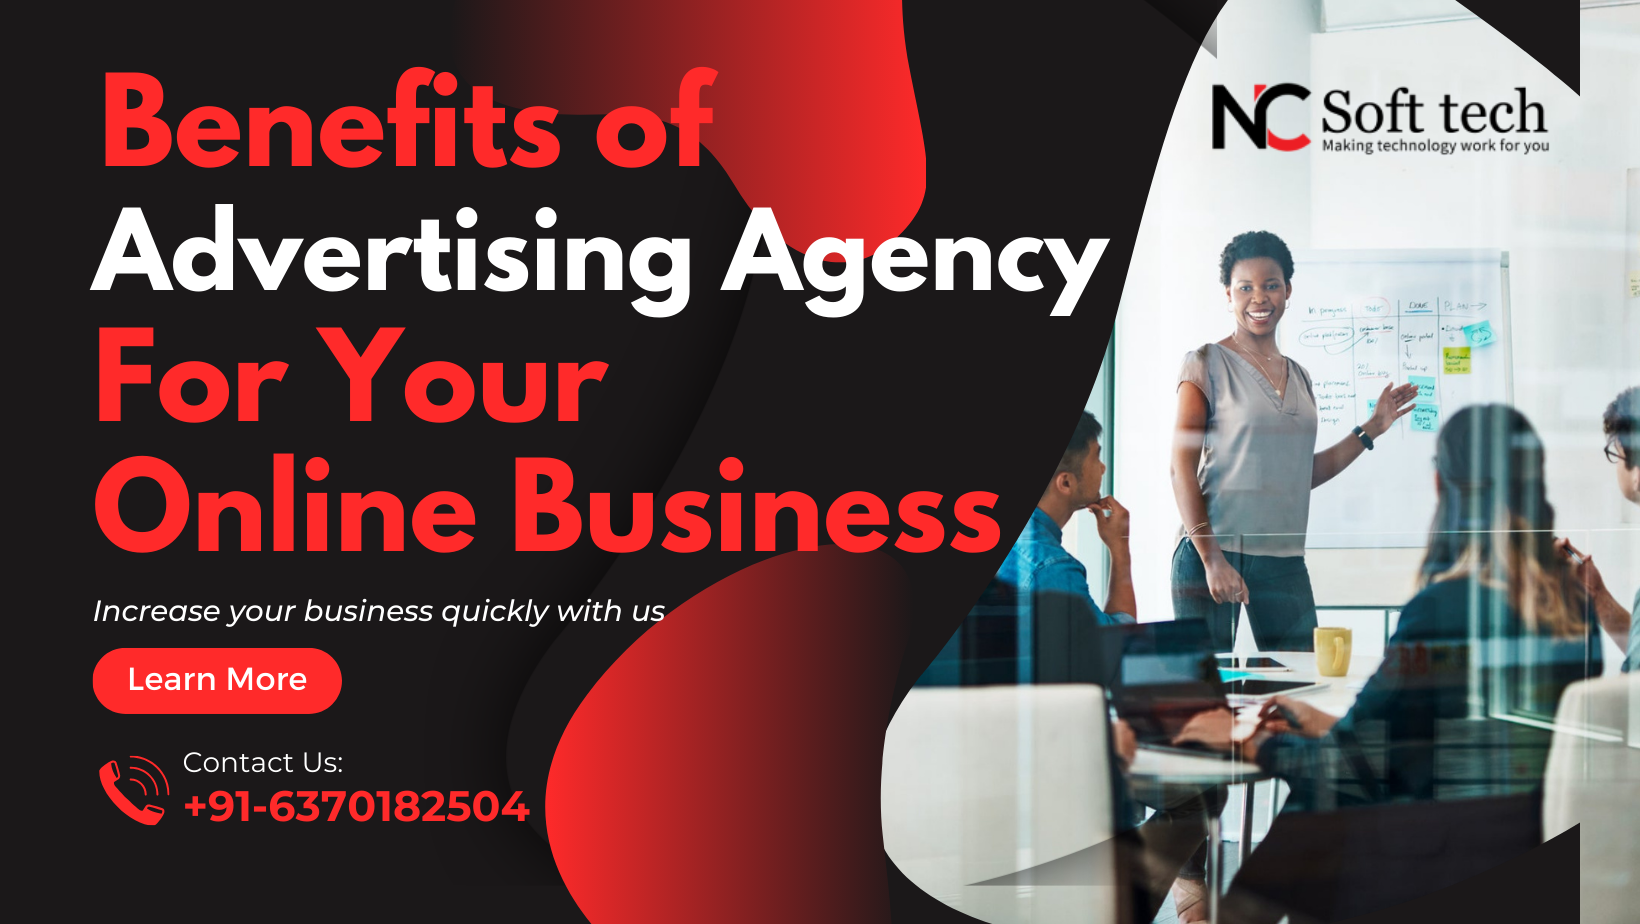 What are the Advantages of Utilizing an Advertising Agency for an Online Business